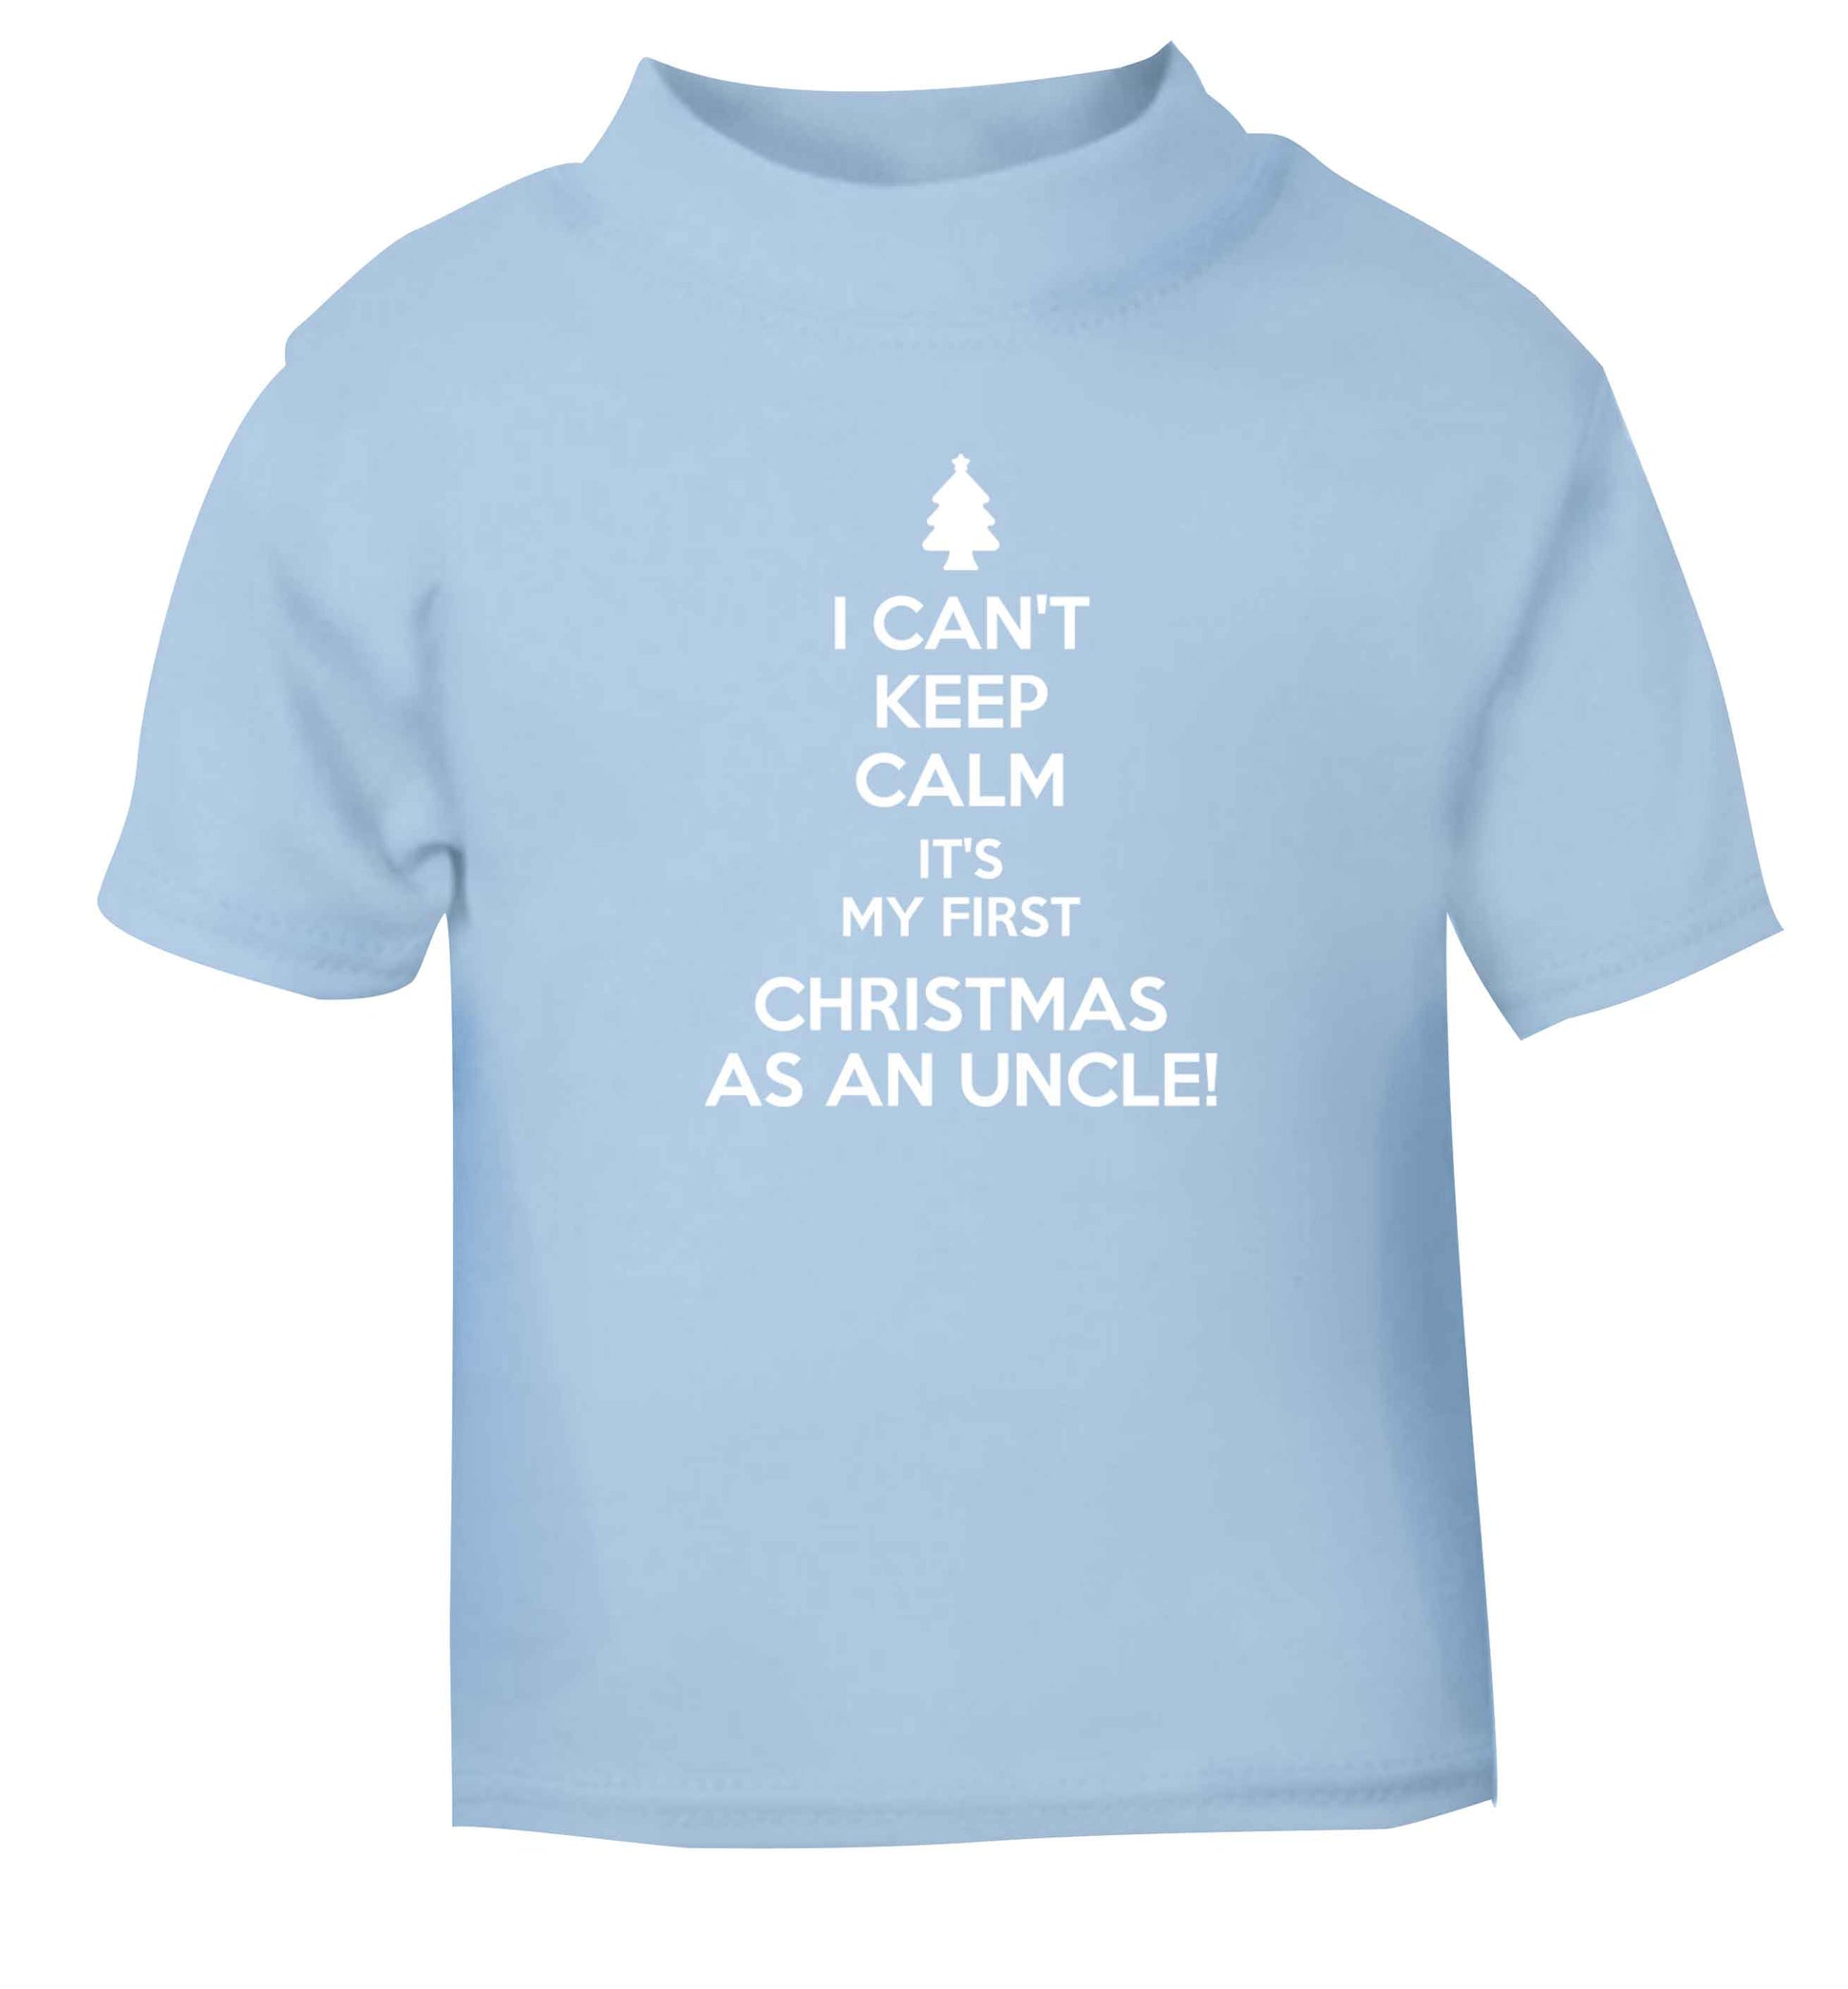 I can't keep calm it's my first Christmas as an uncle! light blue Baby Toddler Tshirt 2 Years